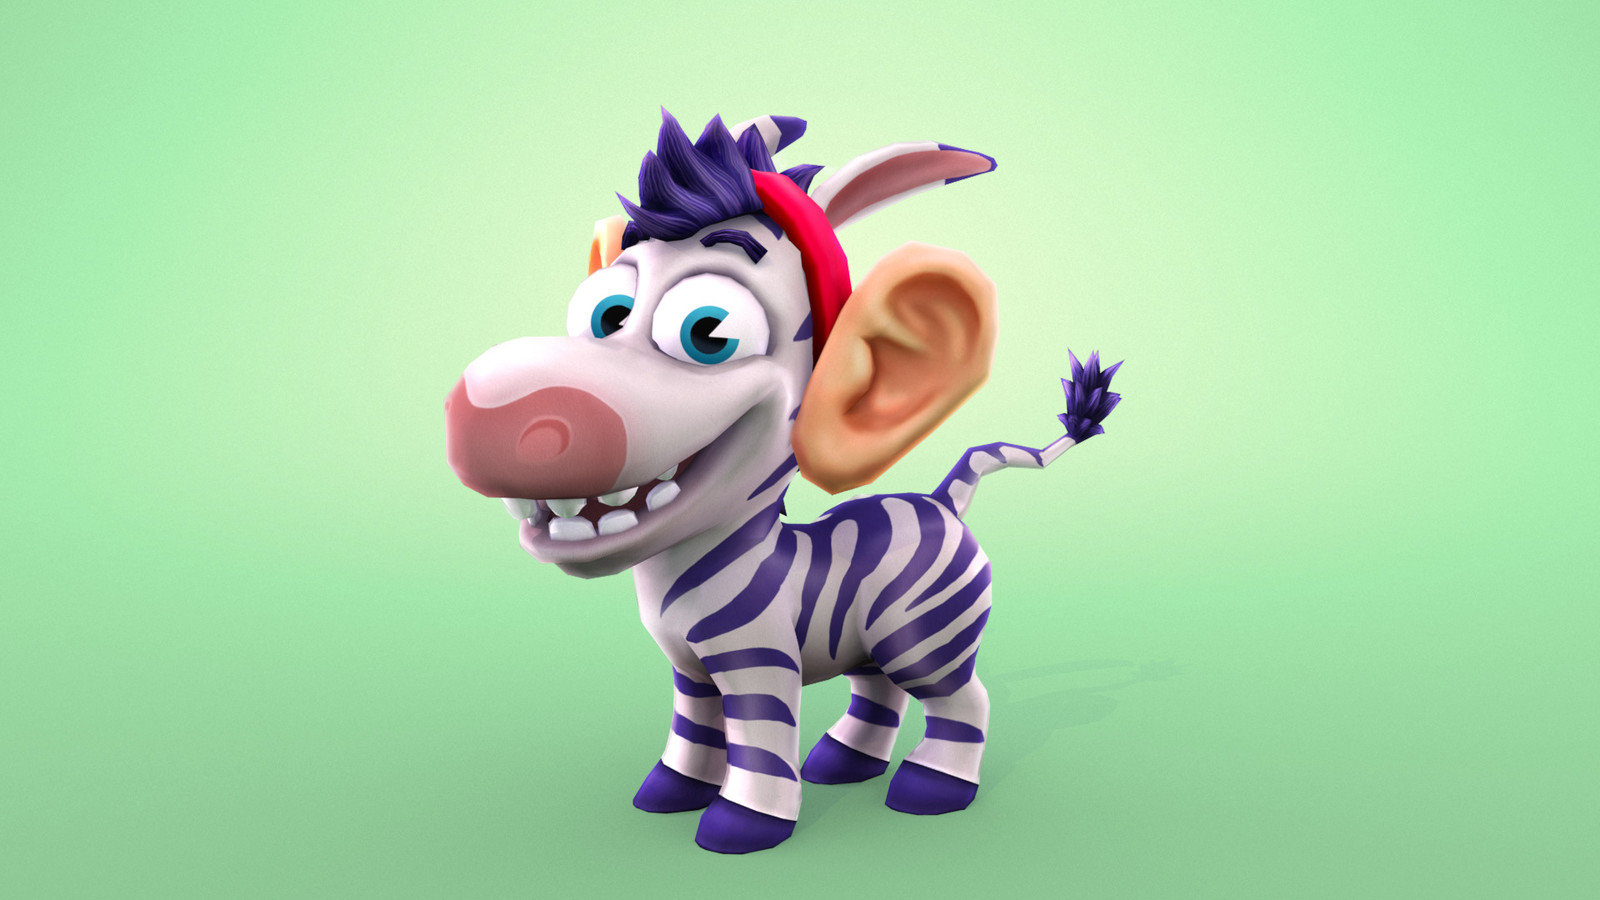 Purchasable Character Wearable. Comedy ears.